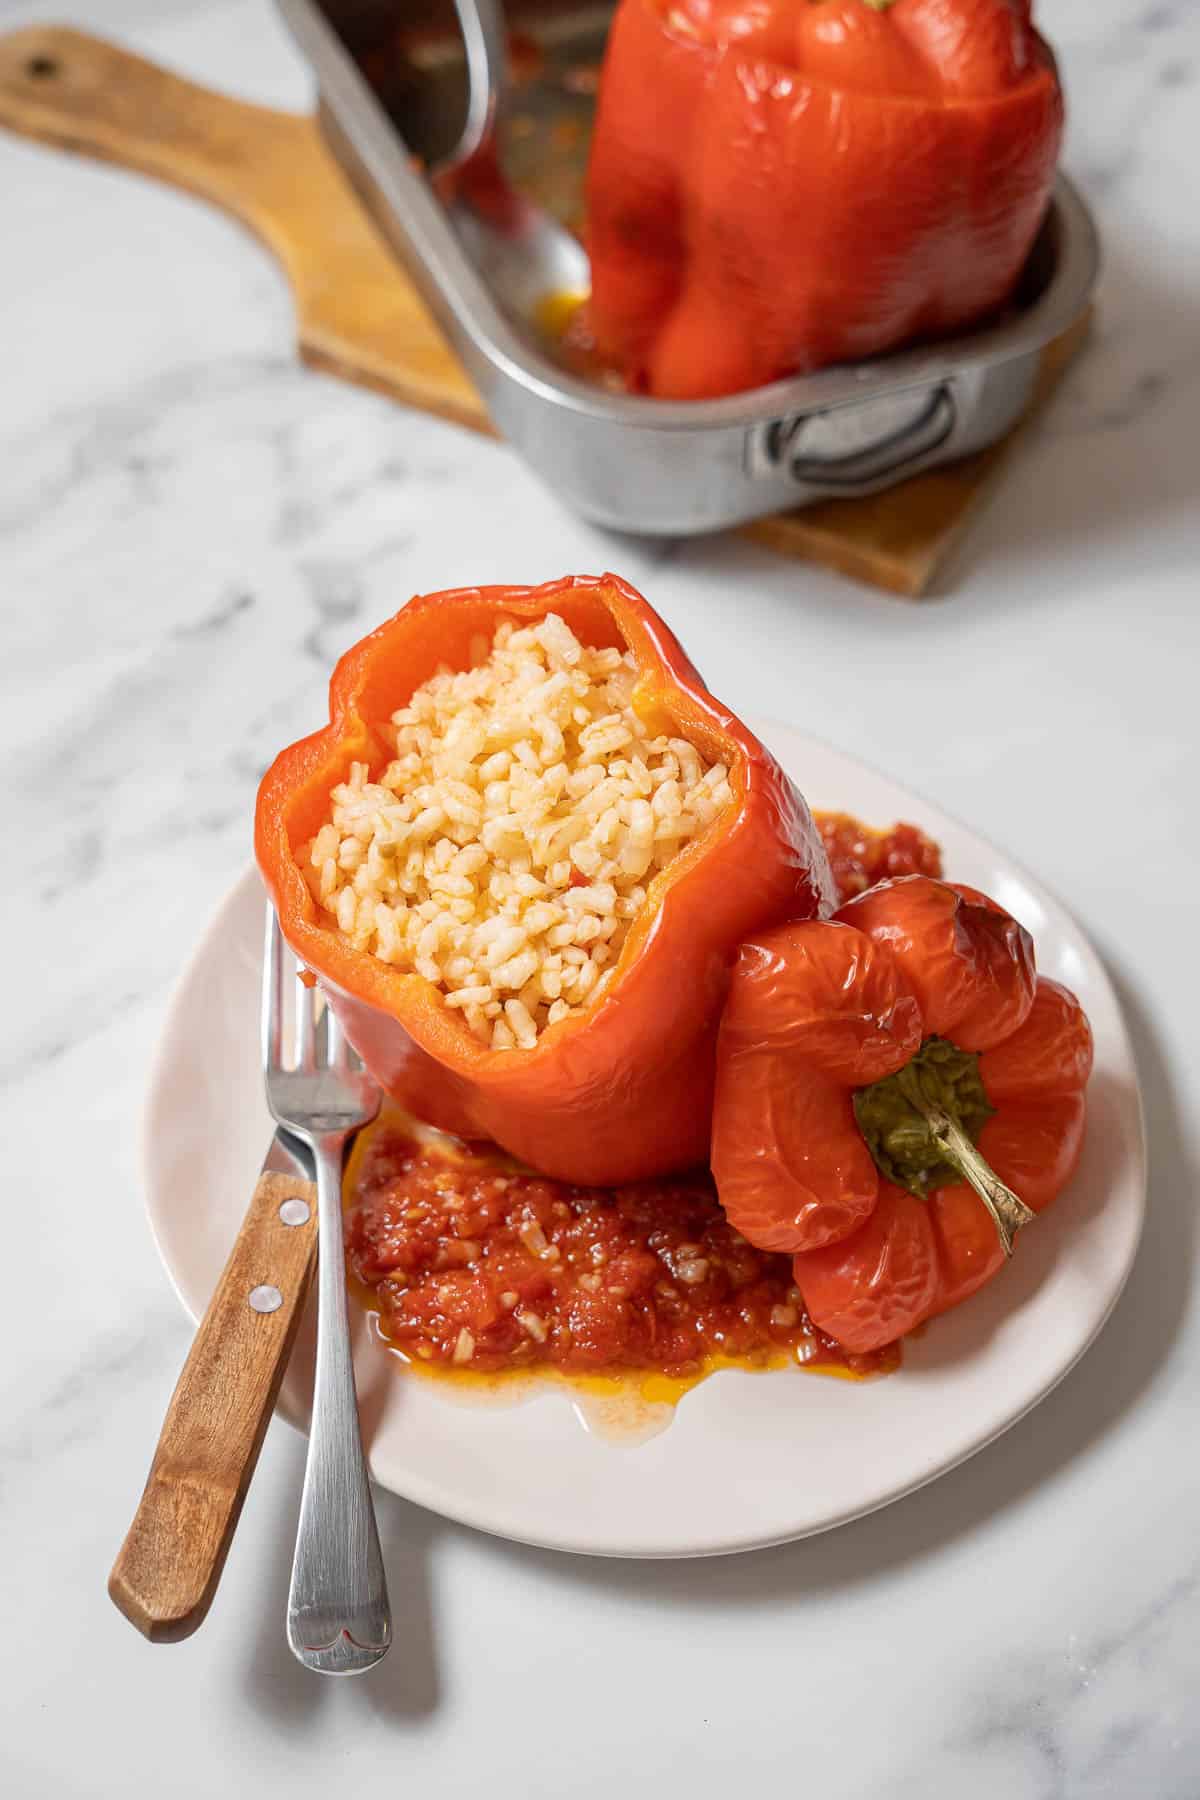 Spanish stuffed pepper with a fork and knife.